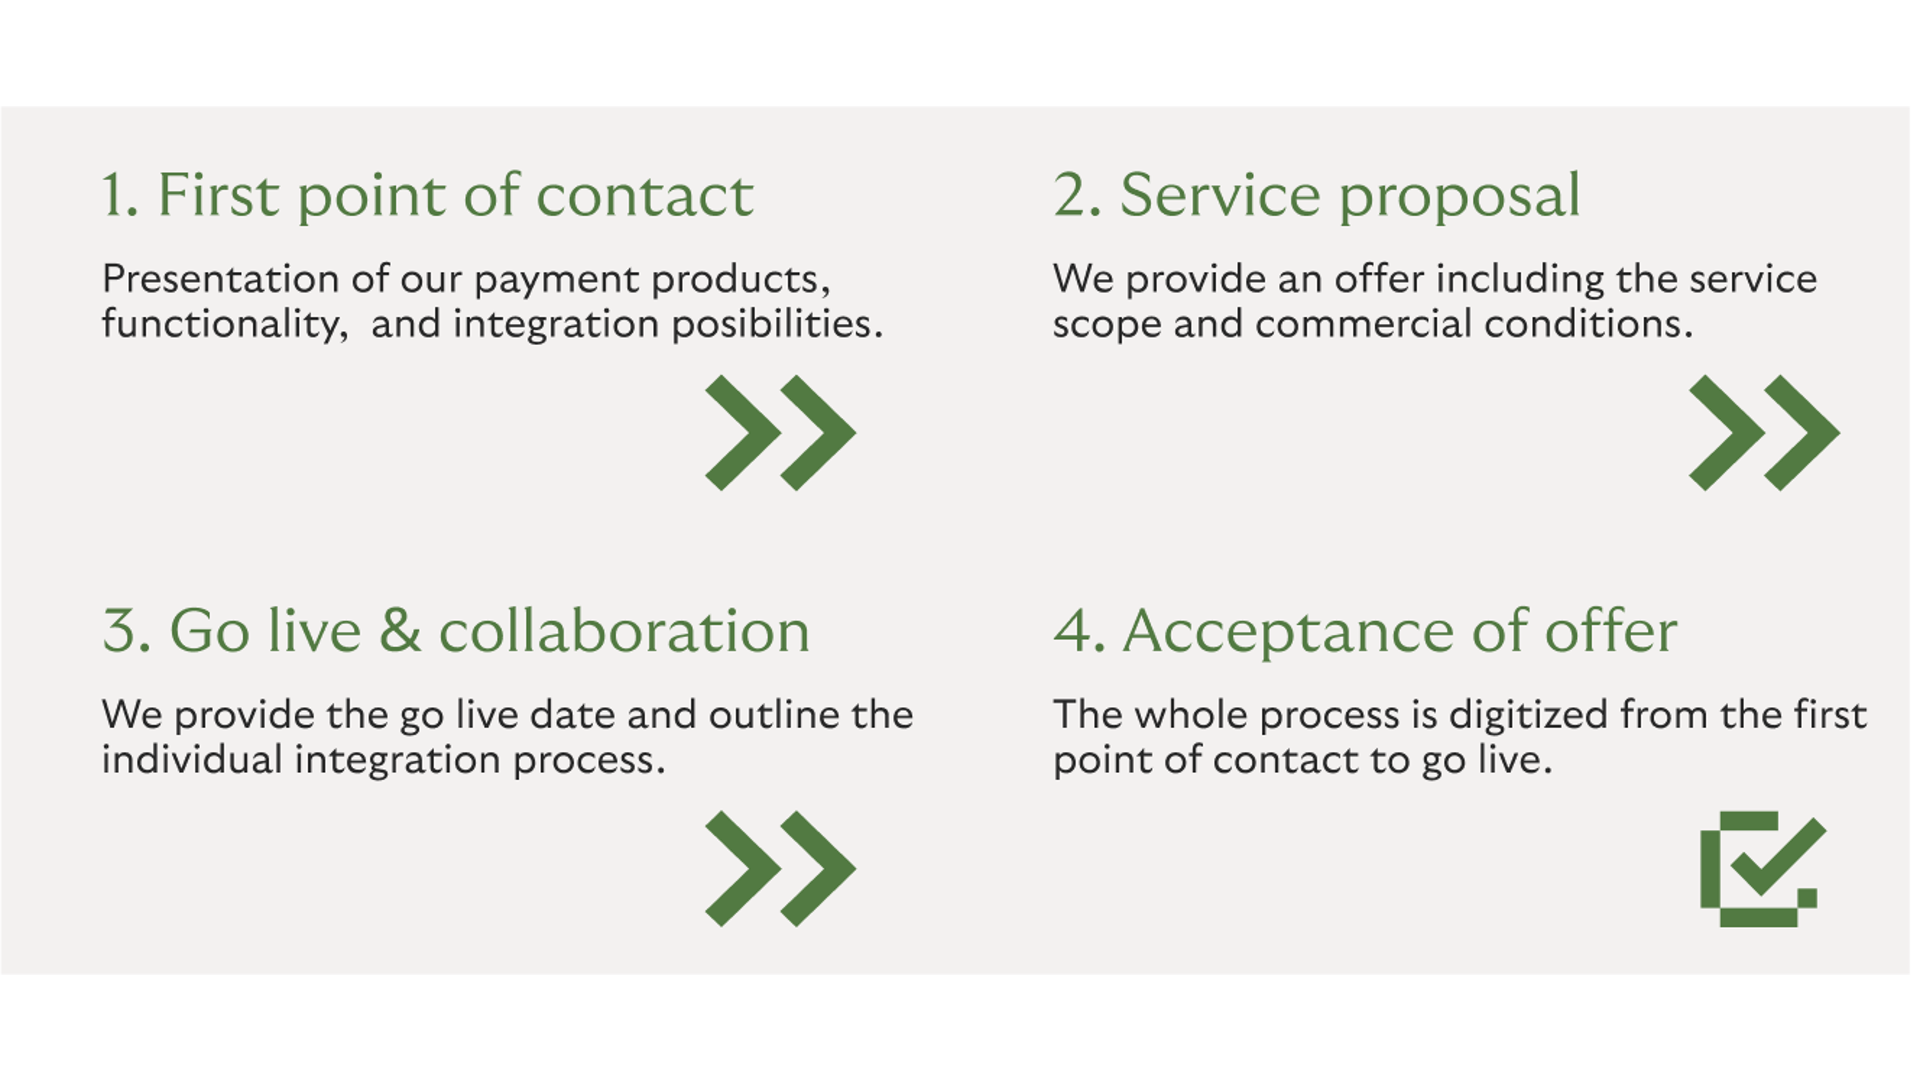 Infographic describing how to get started with our solutions in just four easy steps